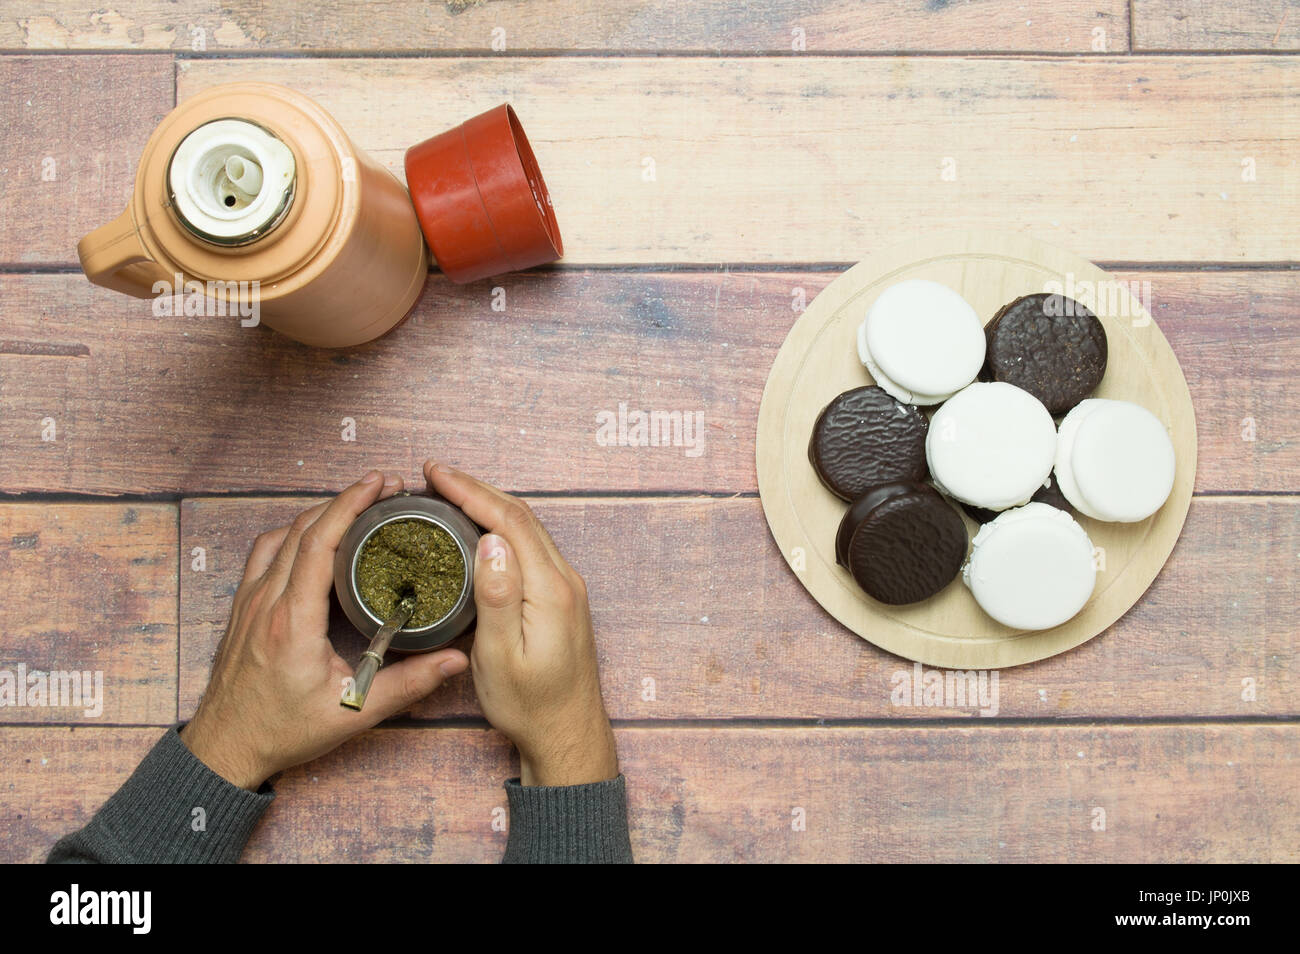 https://c8.alamy.com/comp/JP0JXB/drinking-mate-with-alfajores-on-the-wooden-table-JP0JXB.jpg